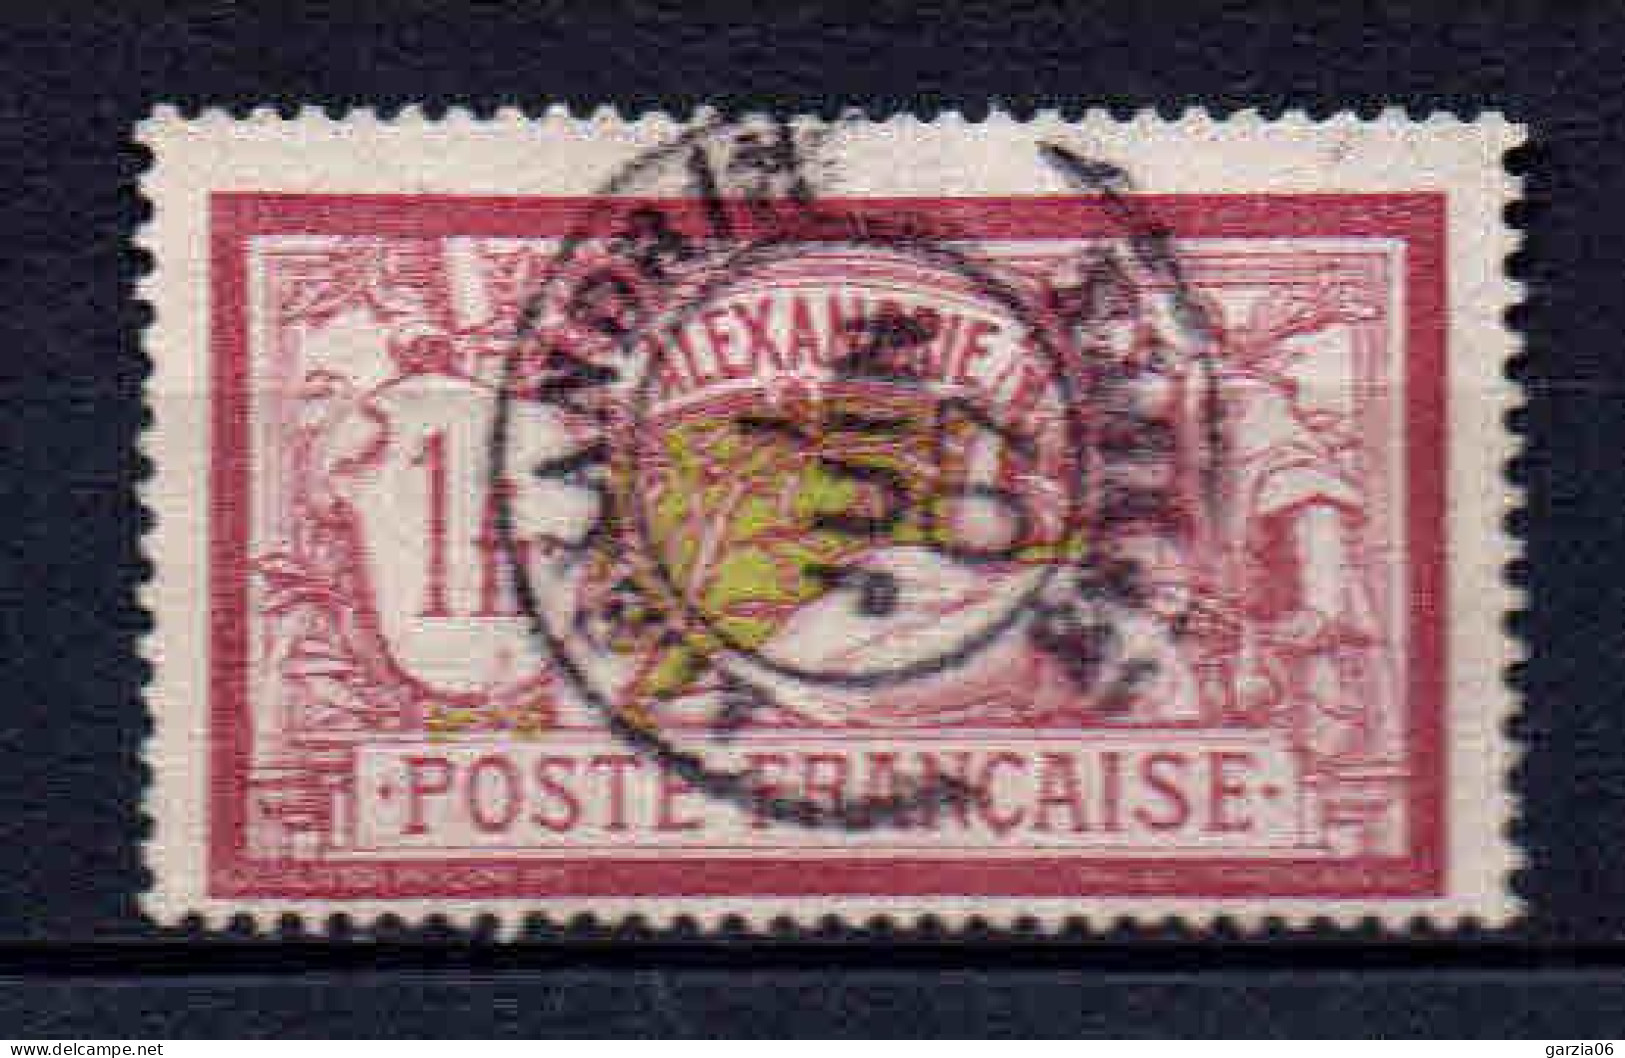 Alexandrie - 1902 -  Type Merson  -  N° 31 - Oblit - Used - Usados